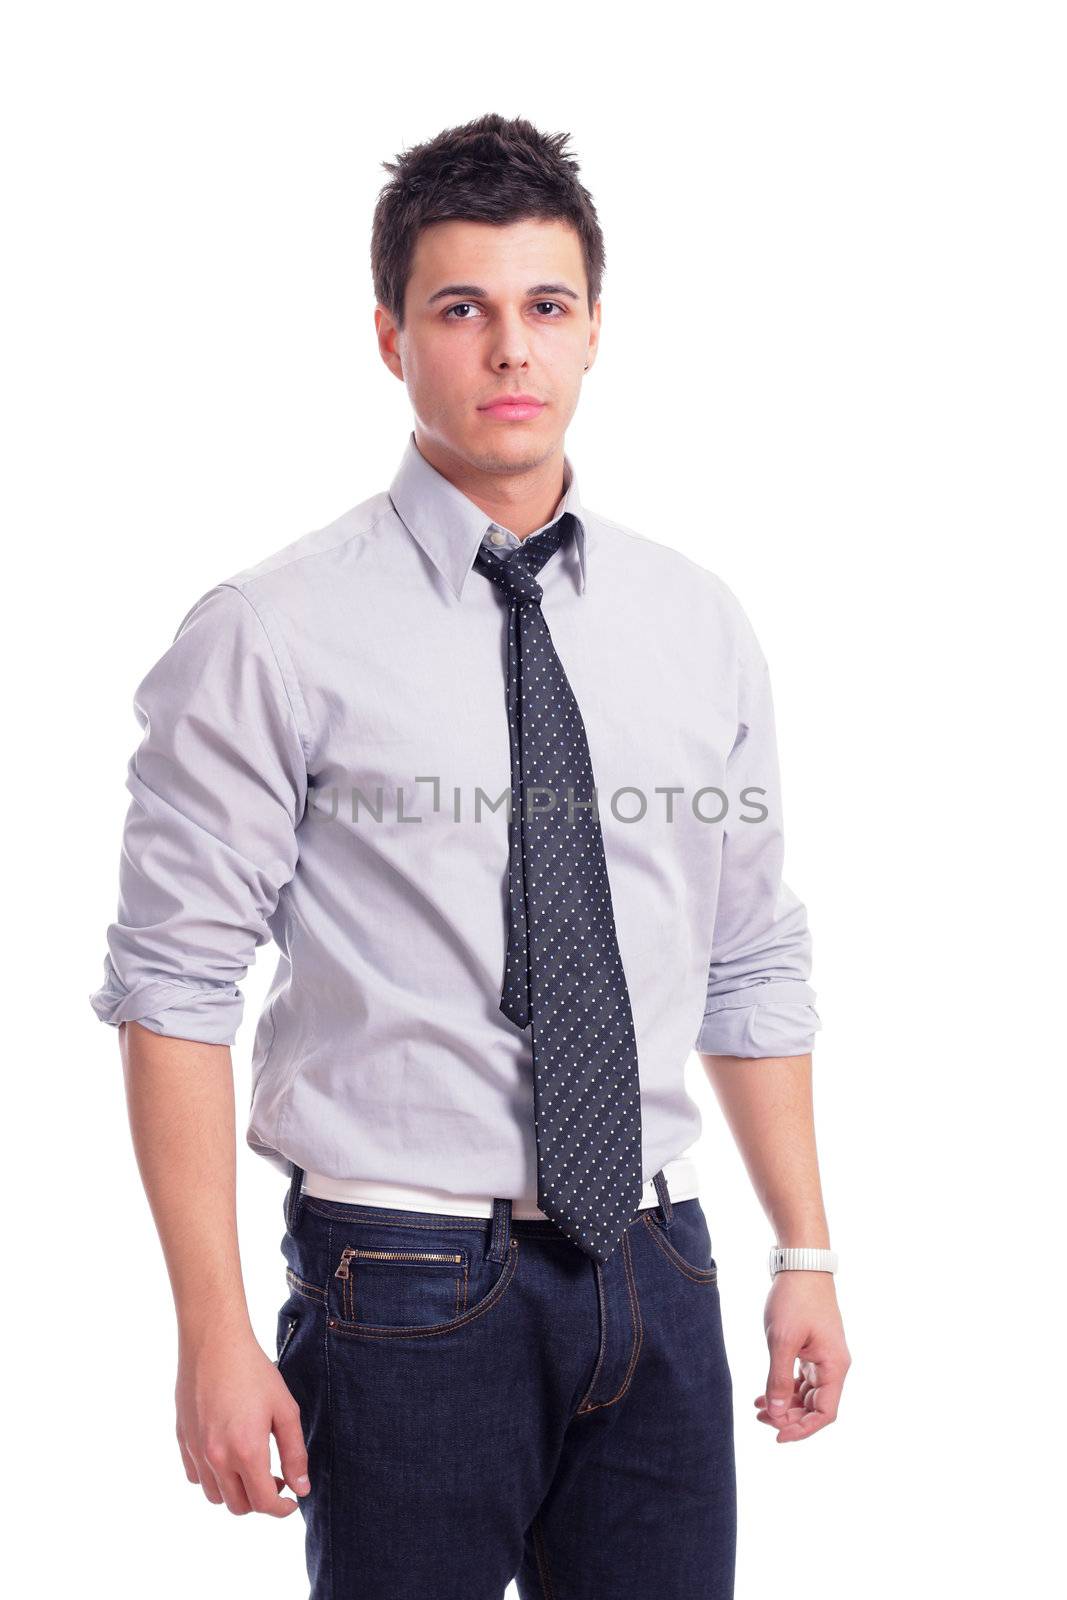 young businessman posing isolated on a white background